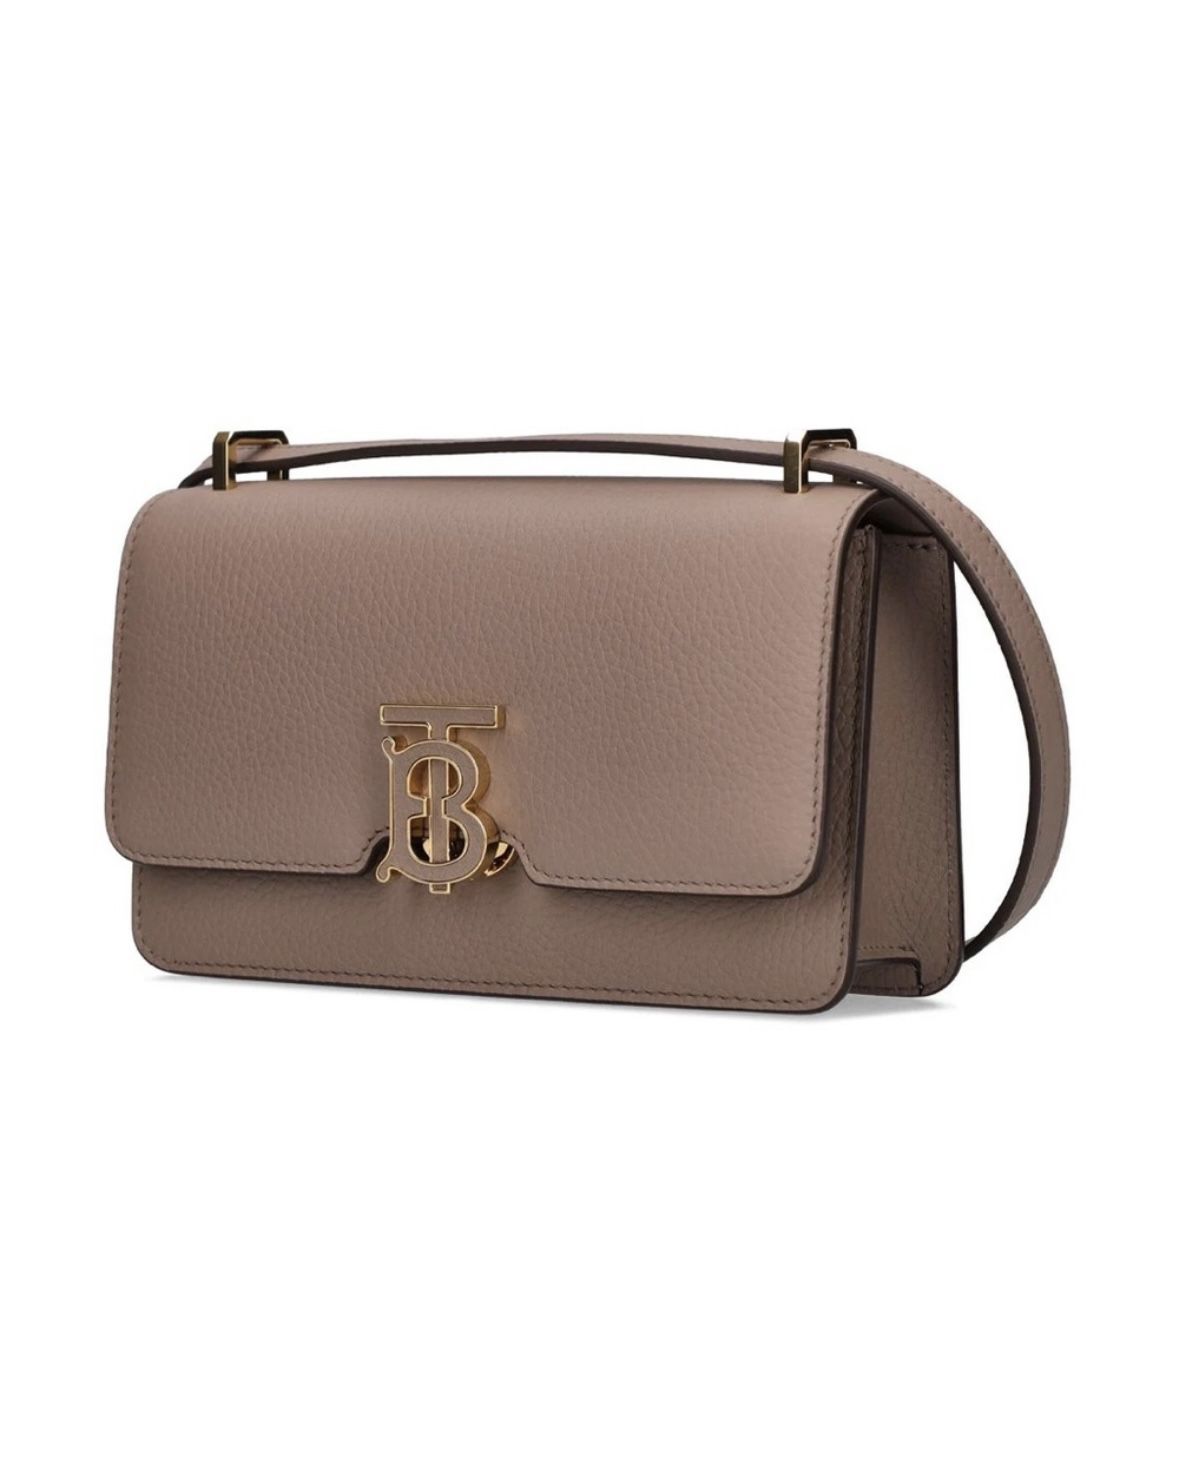 Burberry TB Elongated Grained Leather Shoulder Bag|Tan